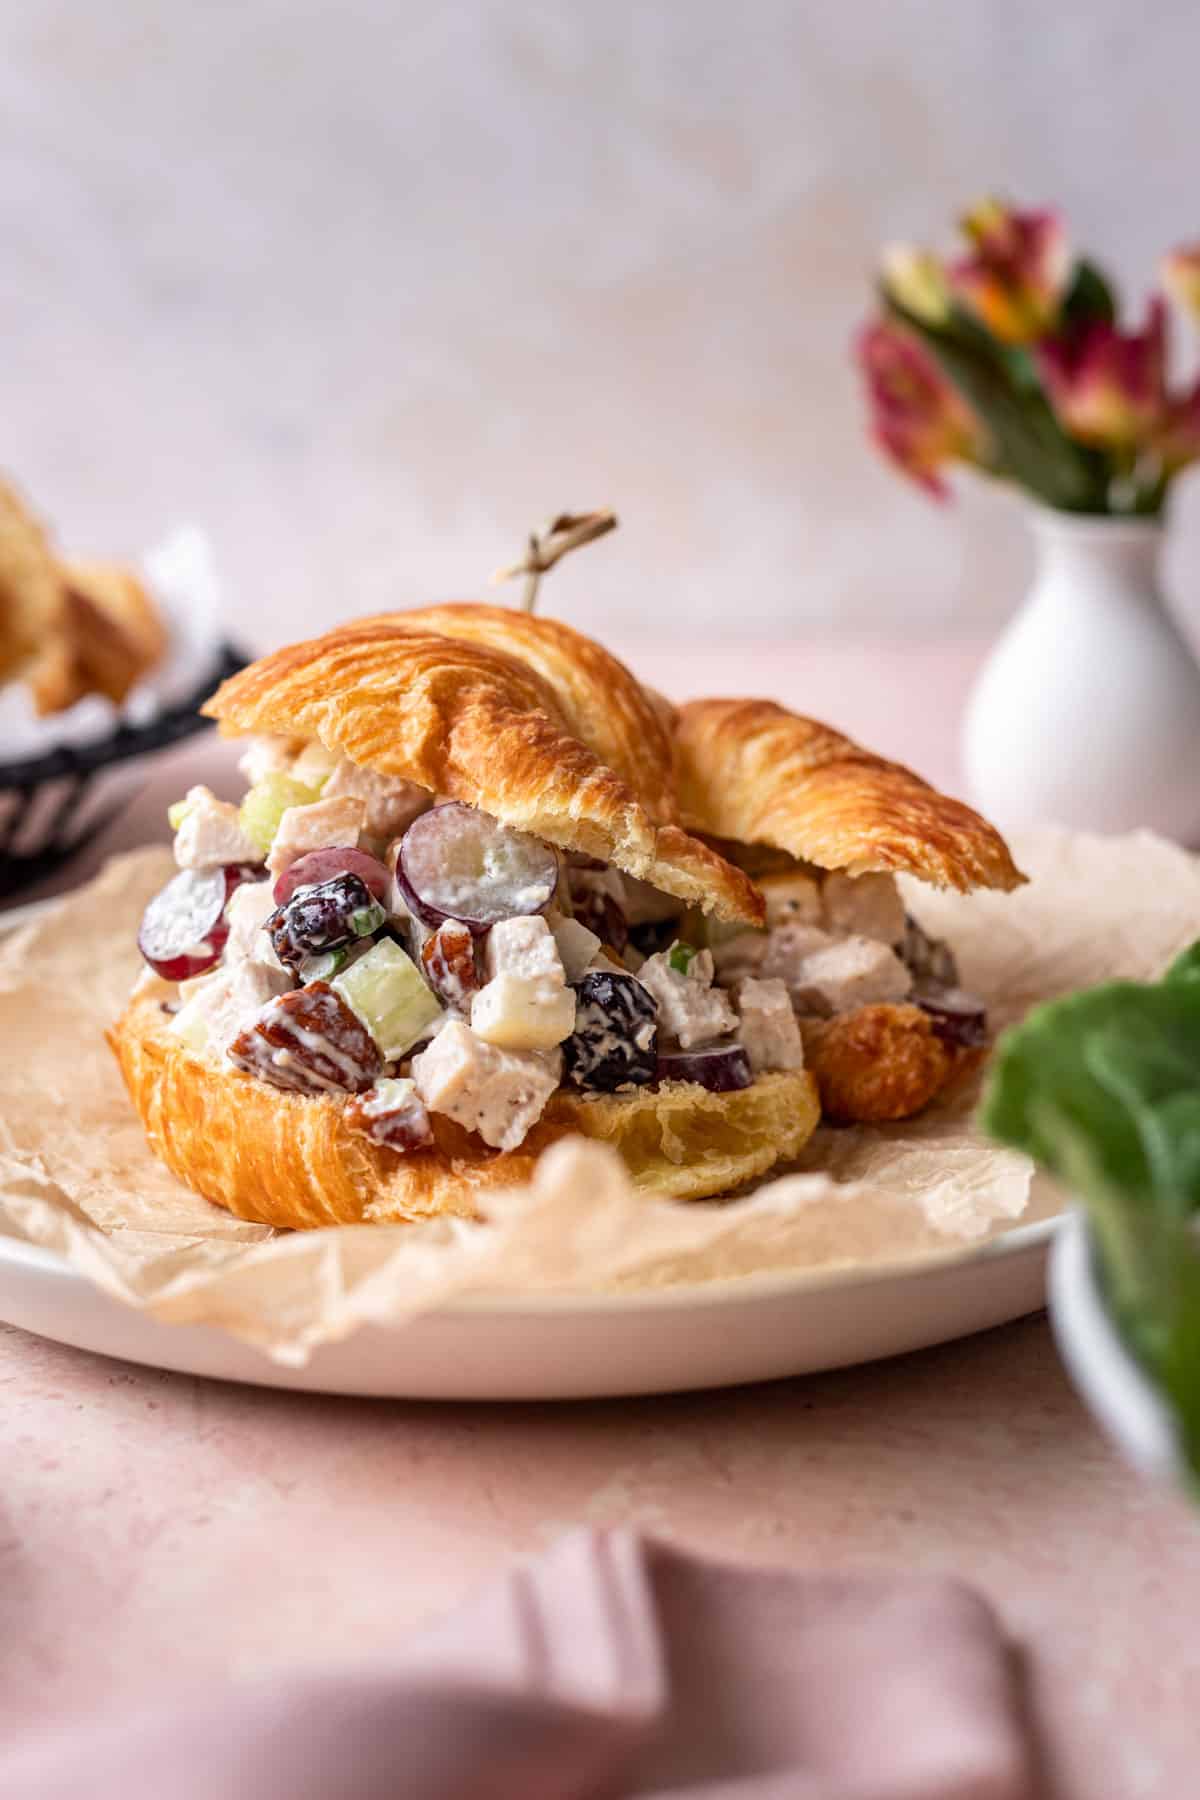 Chicken salad on a croissant with a toothpick sticking out the top.